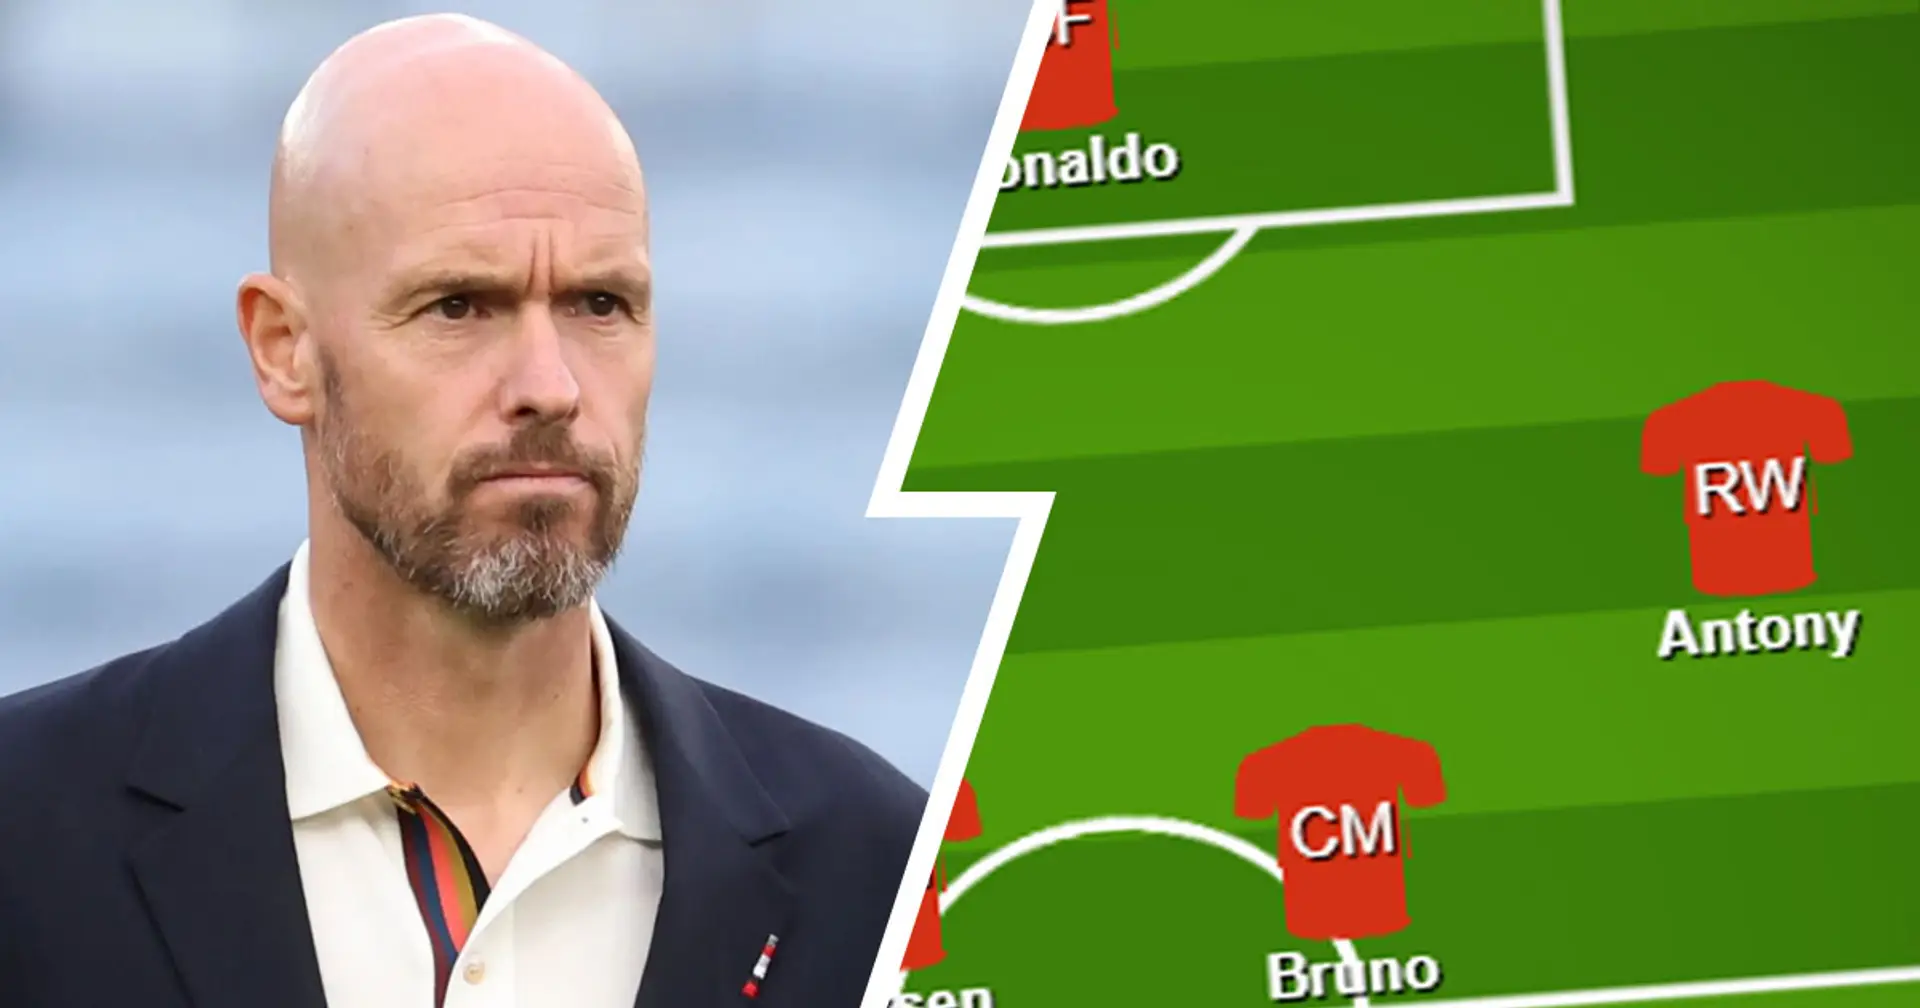 How Man United can line up vs Man City without Rashford or Martial - shown in pic